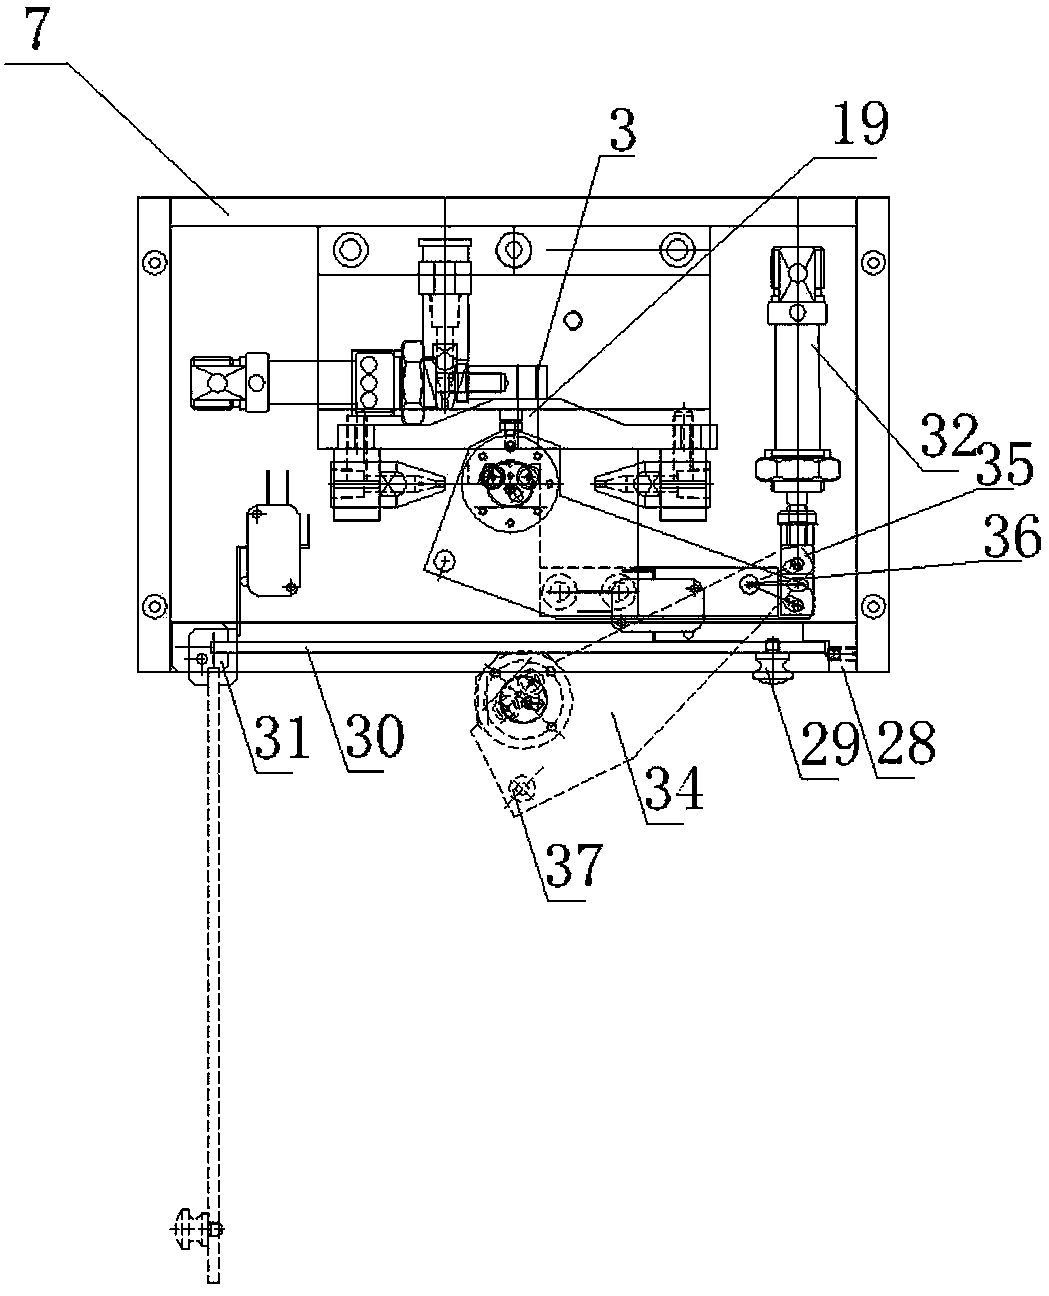 Control valve air blowing device